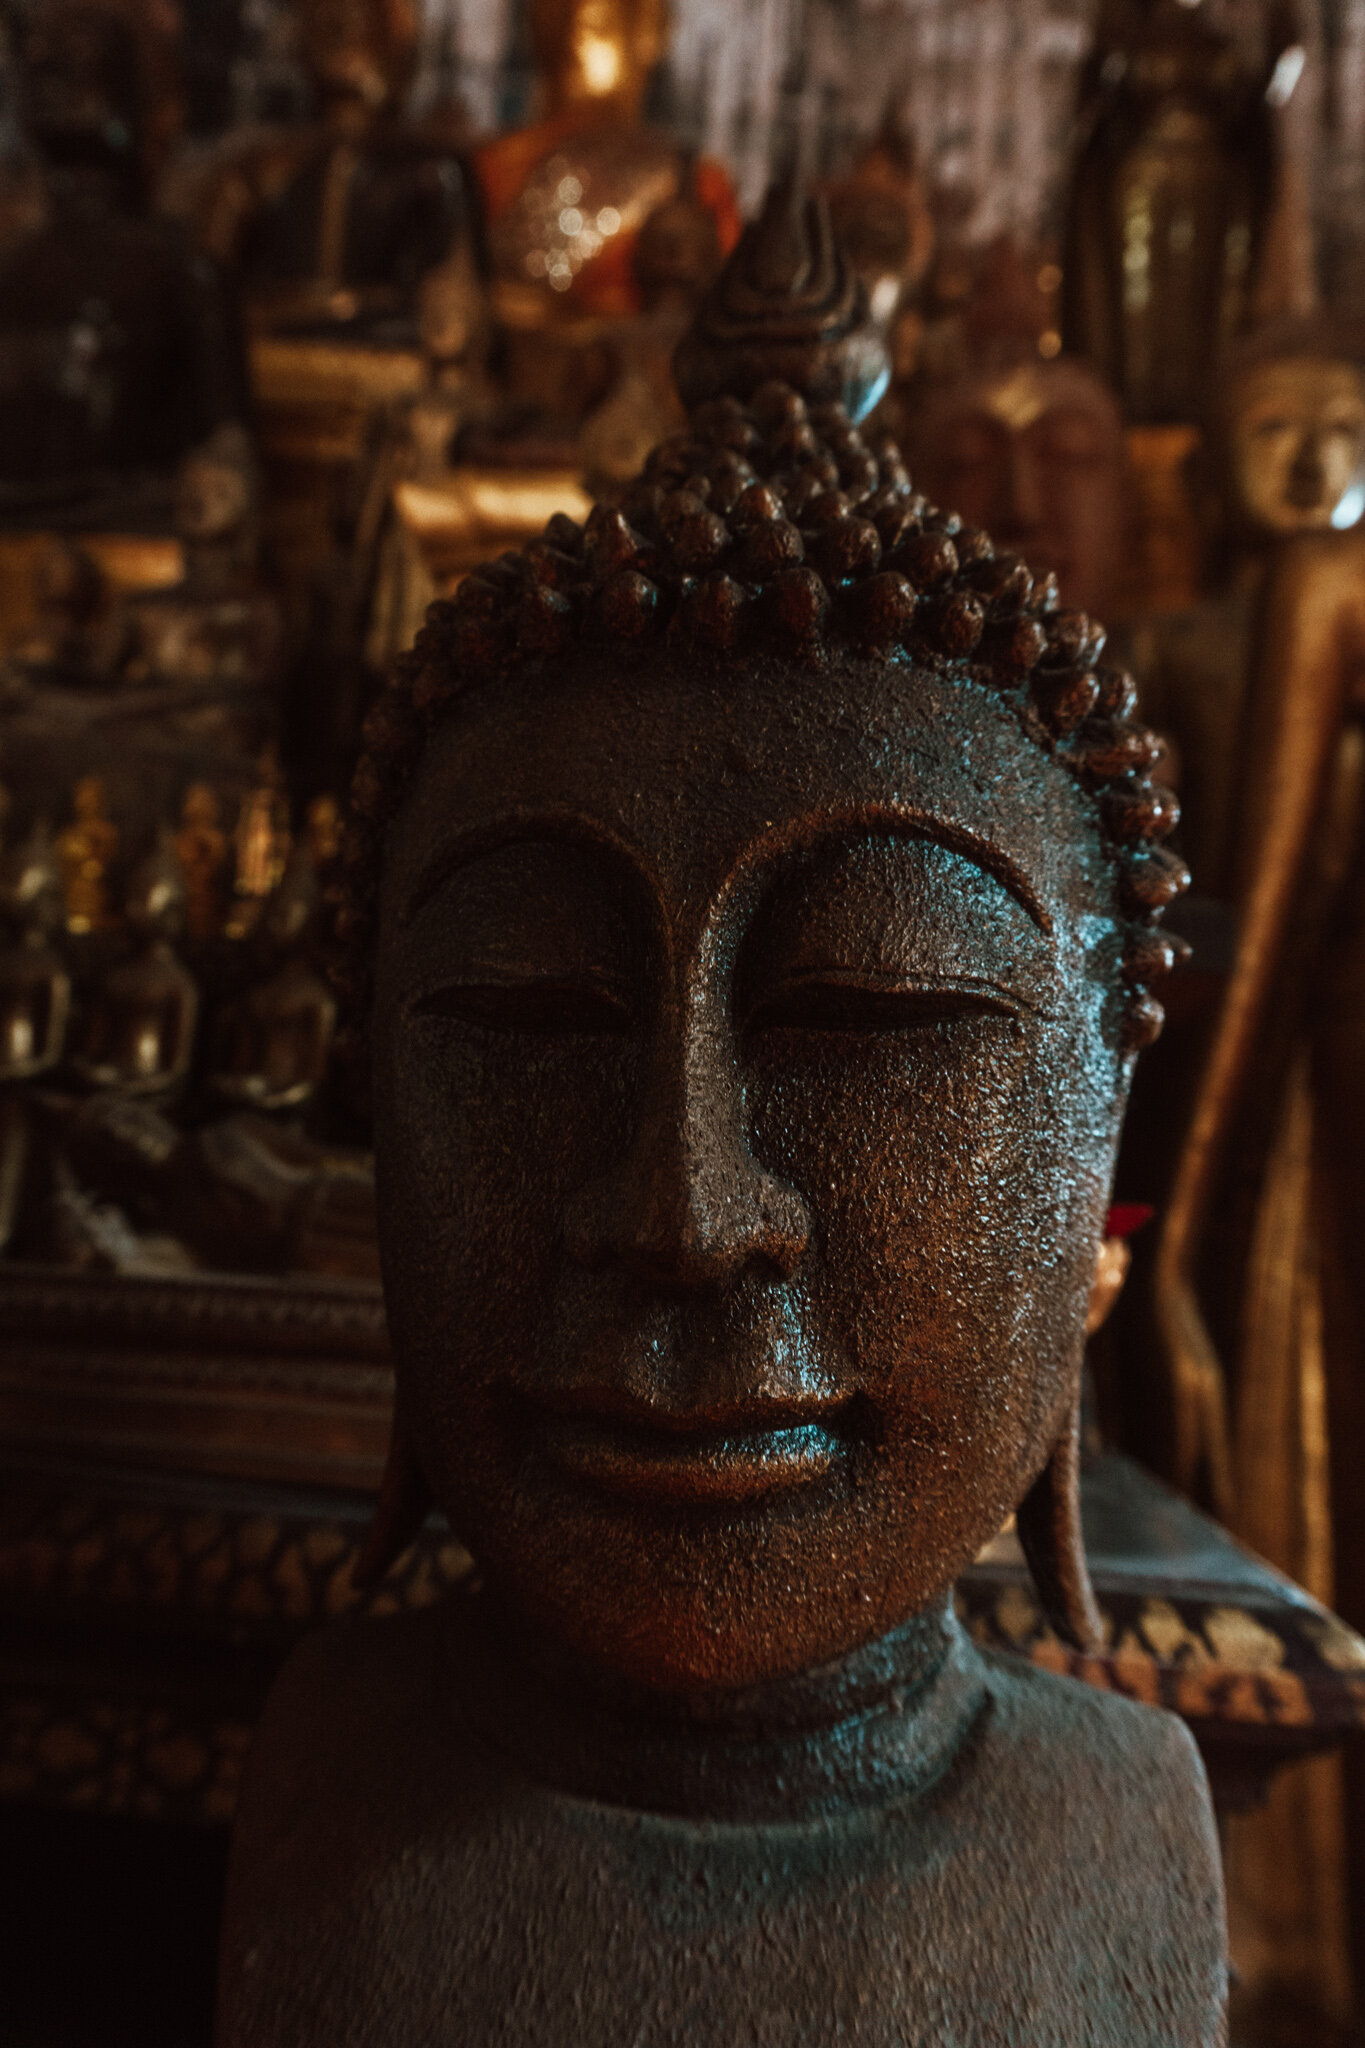 Buddha statue inside a temple in Luang Prabang